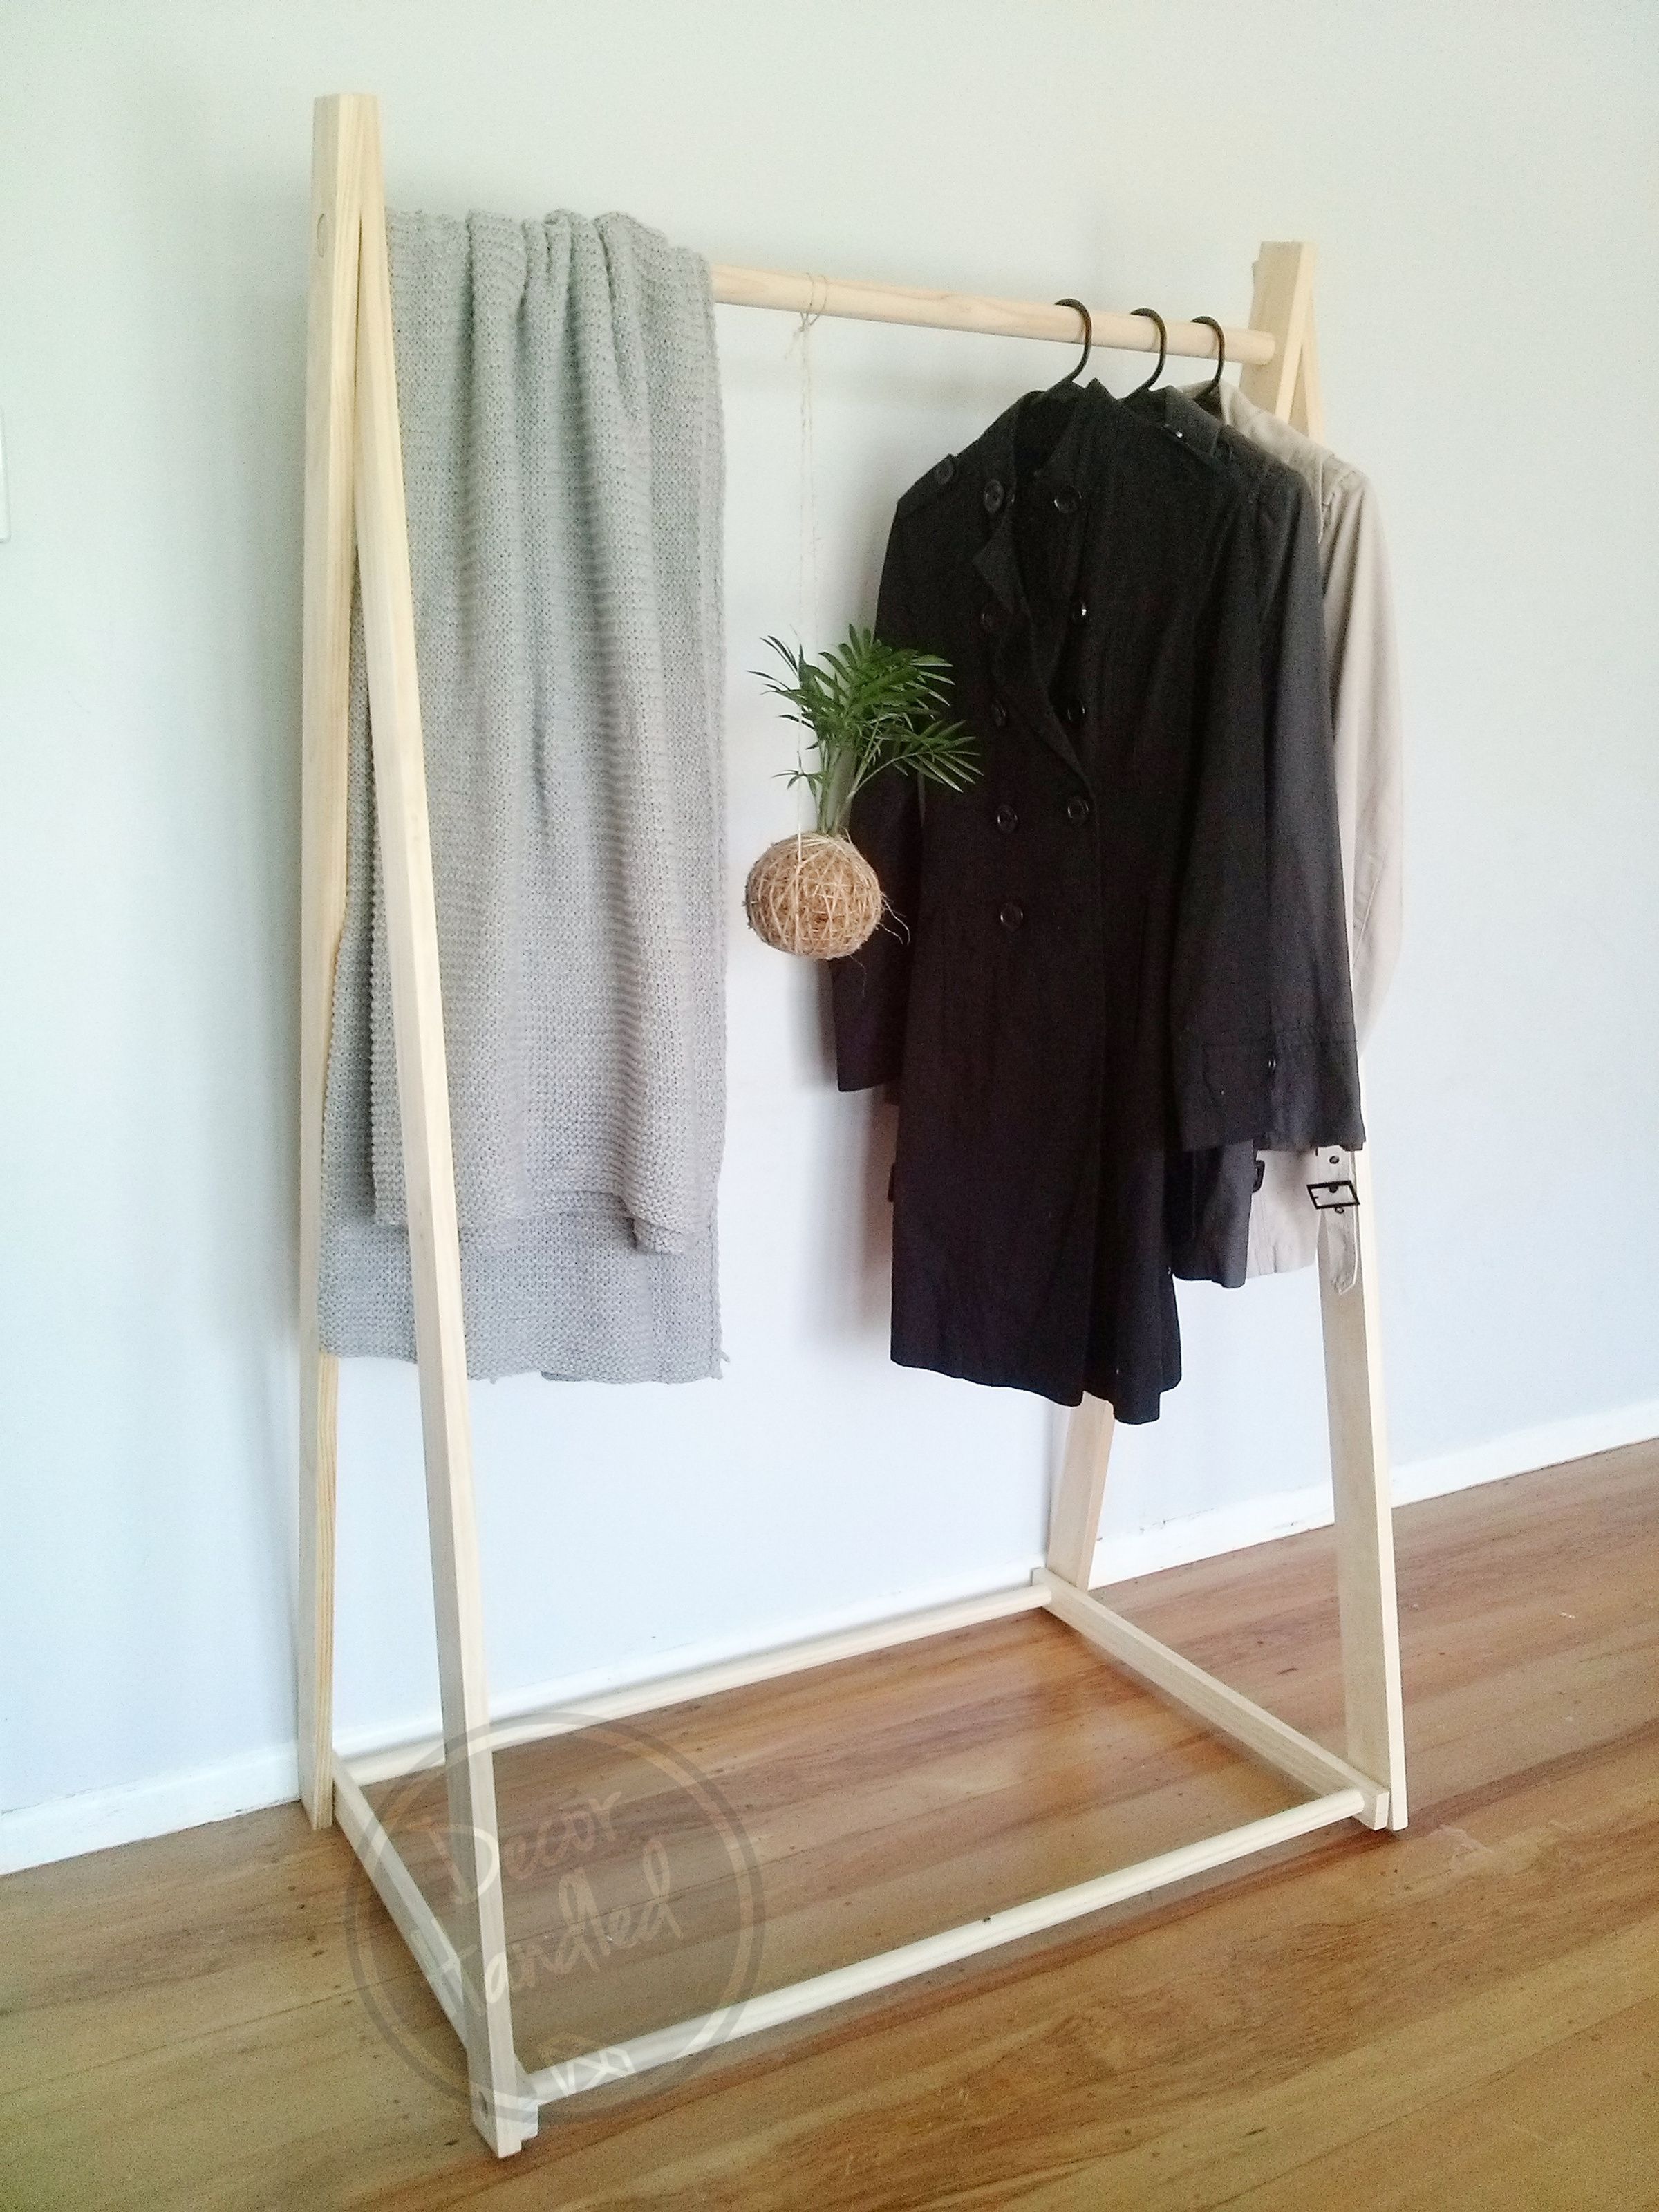 Decor Handled | Tall A-frame Clothing Rack, Accessories